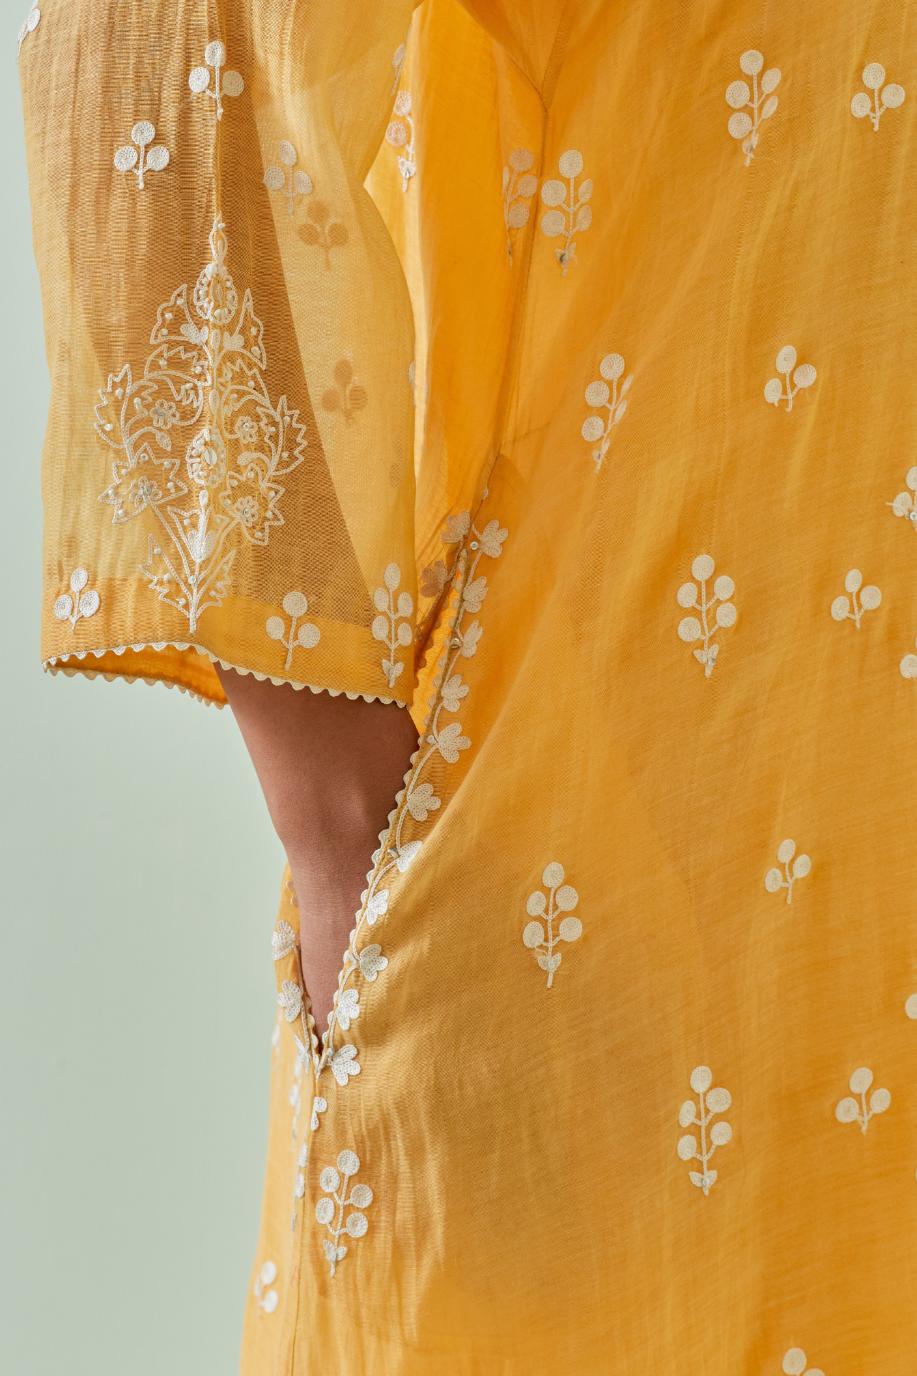 Yellow kalidar cotton chanderi short kurta set, highlighted with delicate off-white embroidery.